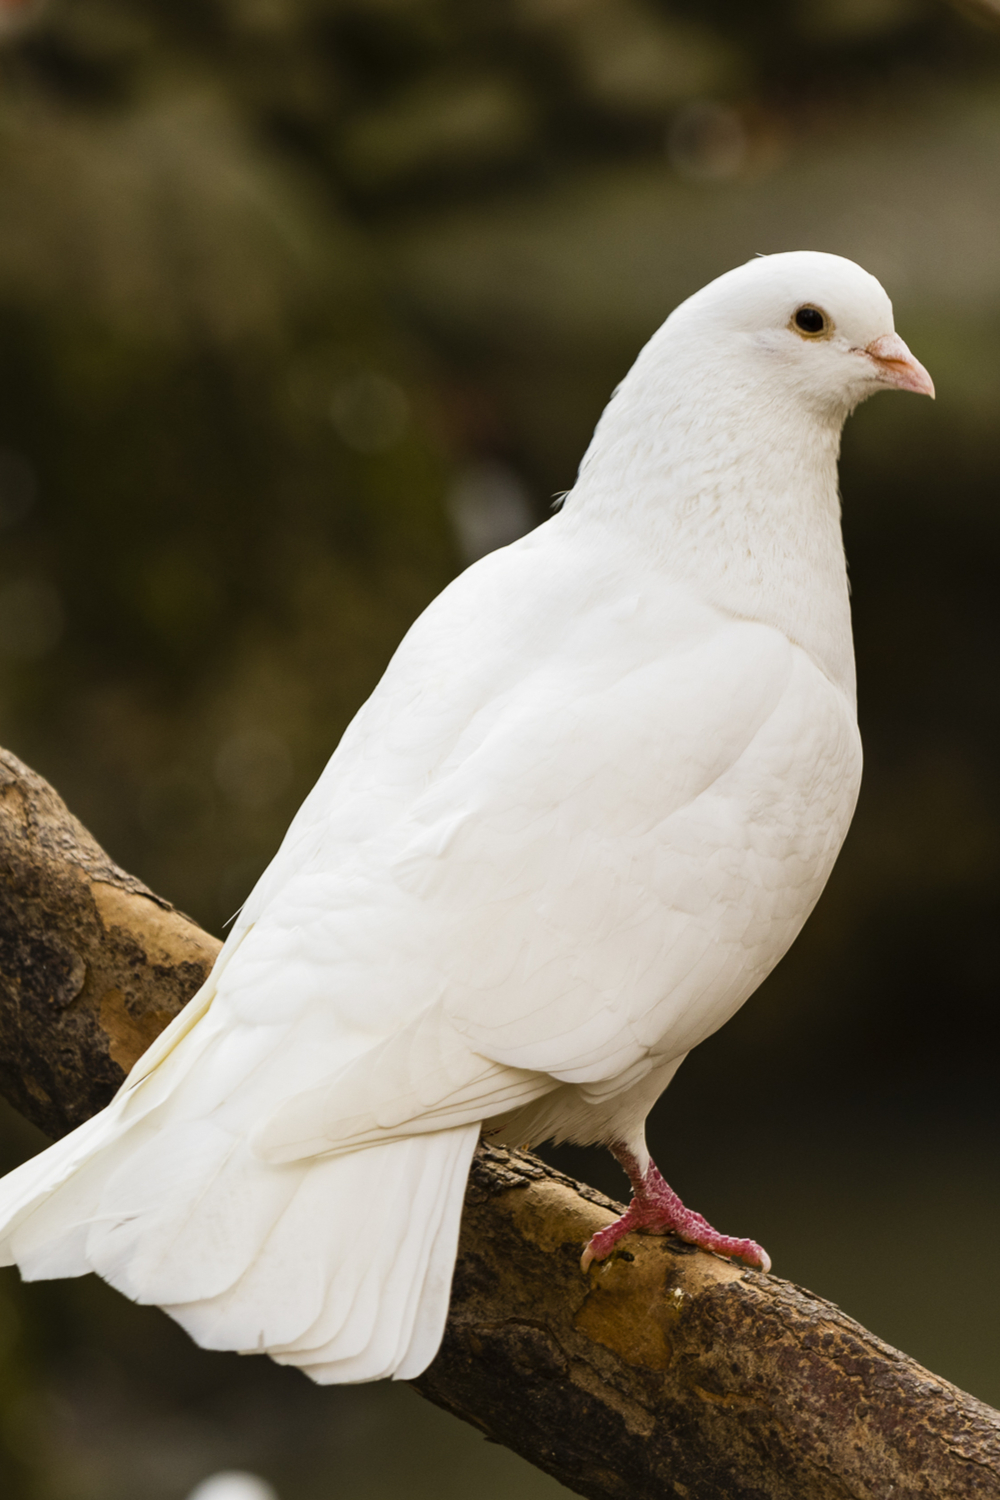 What Does a White Dove Symbolize in Death